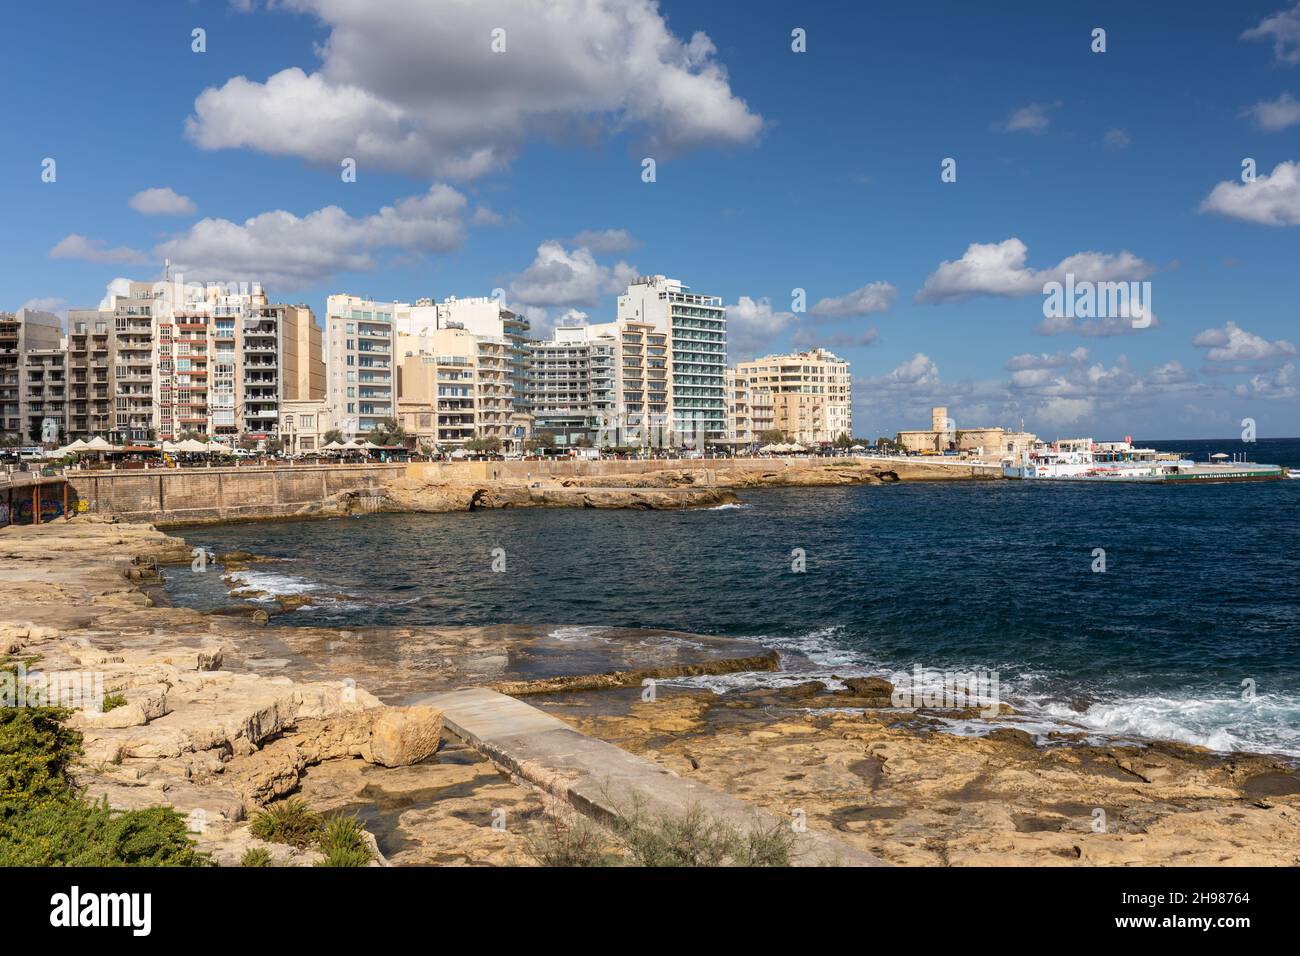 Sliema picturesque rocky beach with its many waterfront hotels and restaurants, Sliema, Malta, Europe Stock Photo